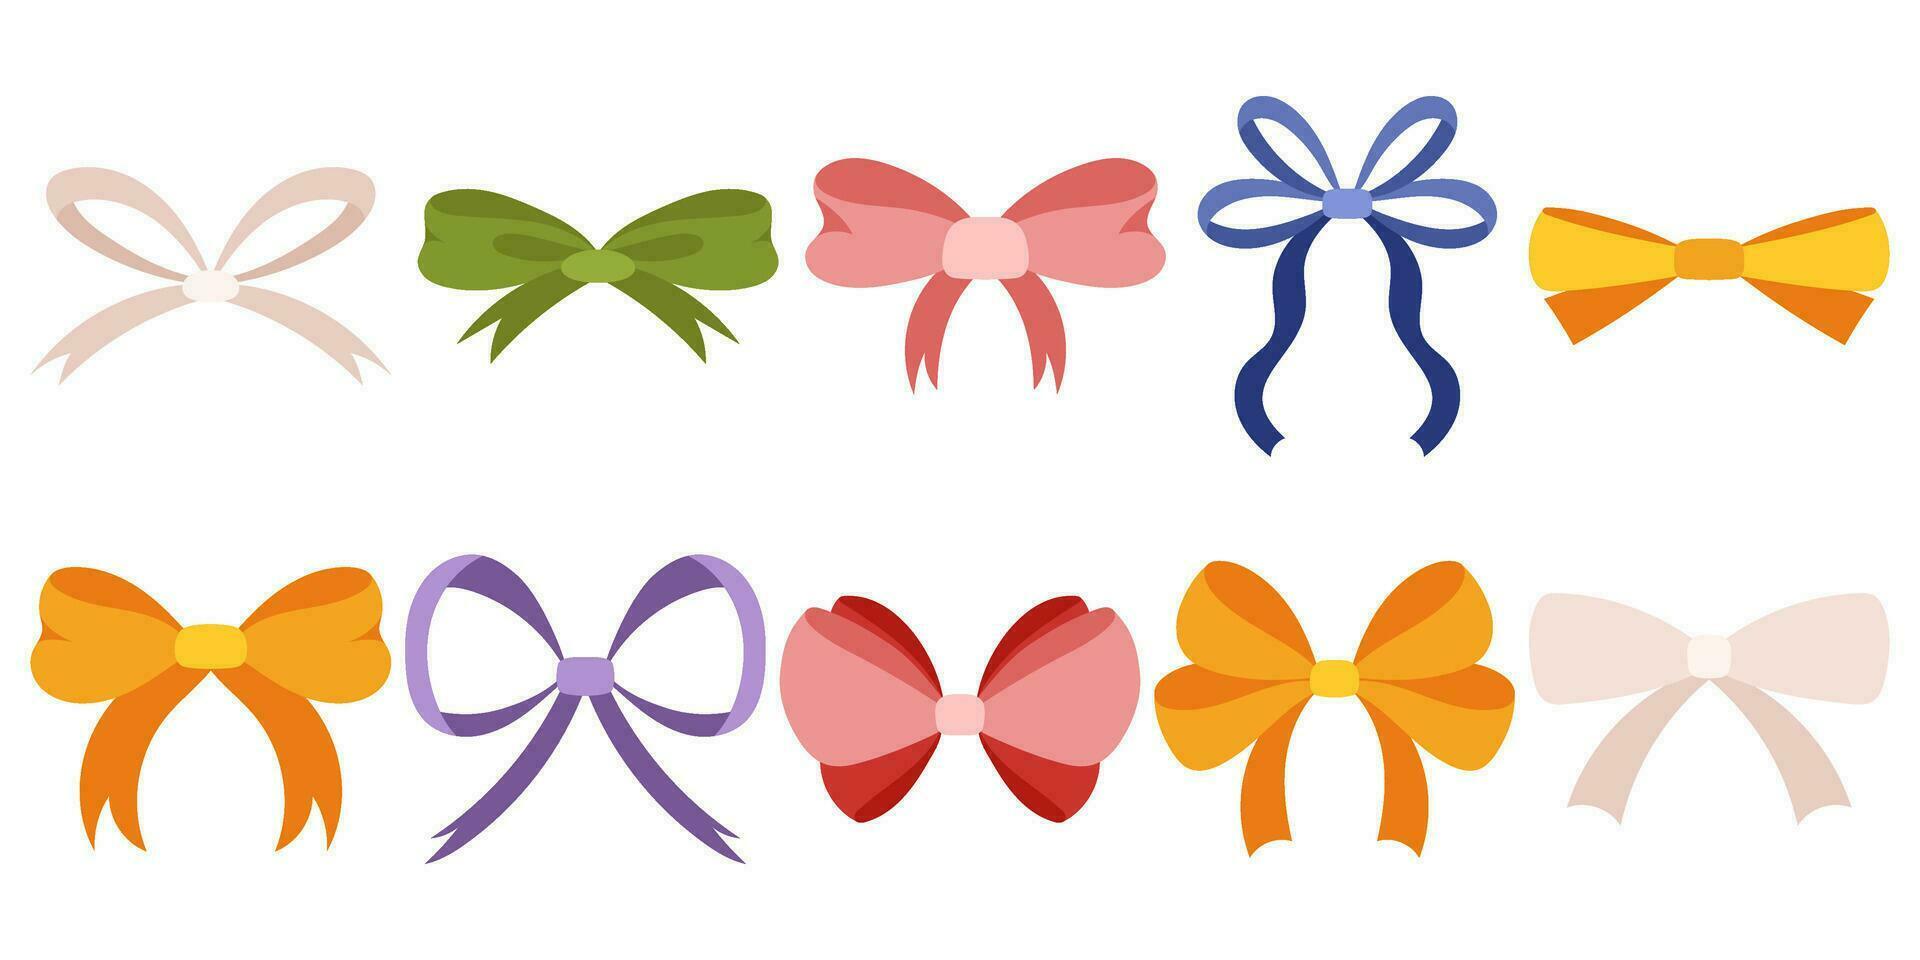 Adorable Hand-Drawn Ribbon Bows in a Flat Style. Versatile Bowknot Collection for Chic Decorations. A Large Set of  Bowties. vector